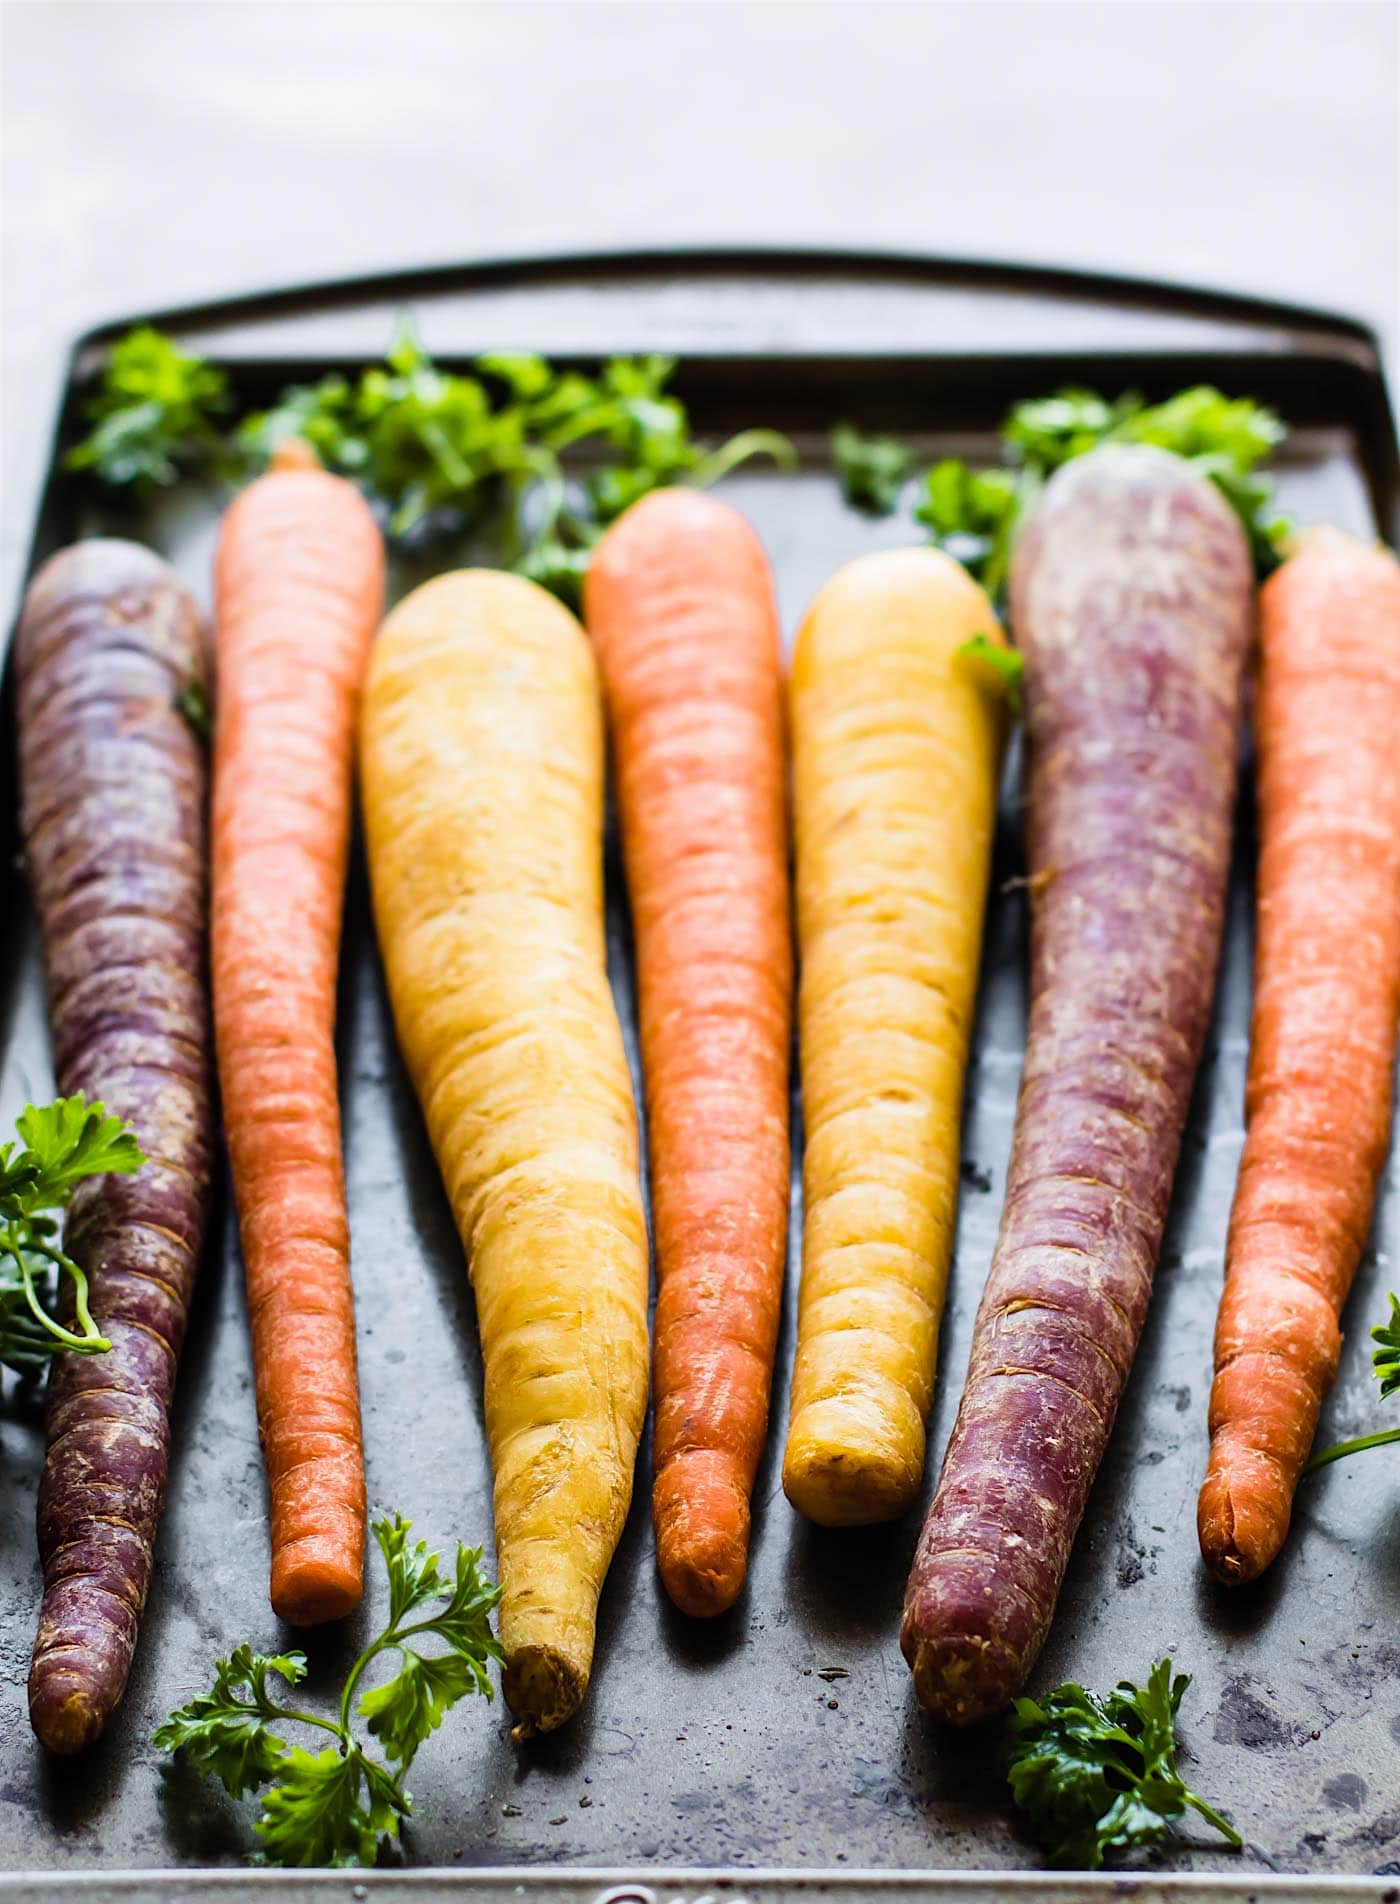 Several rainbow colored carrots with green leaved tops laying on a baking sheet.